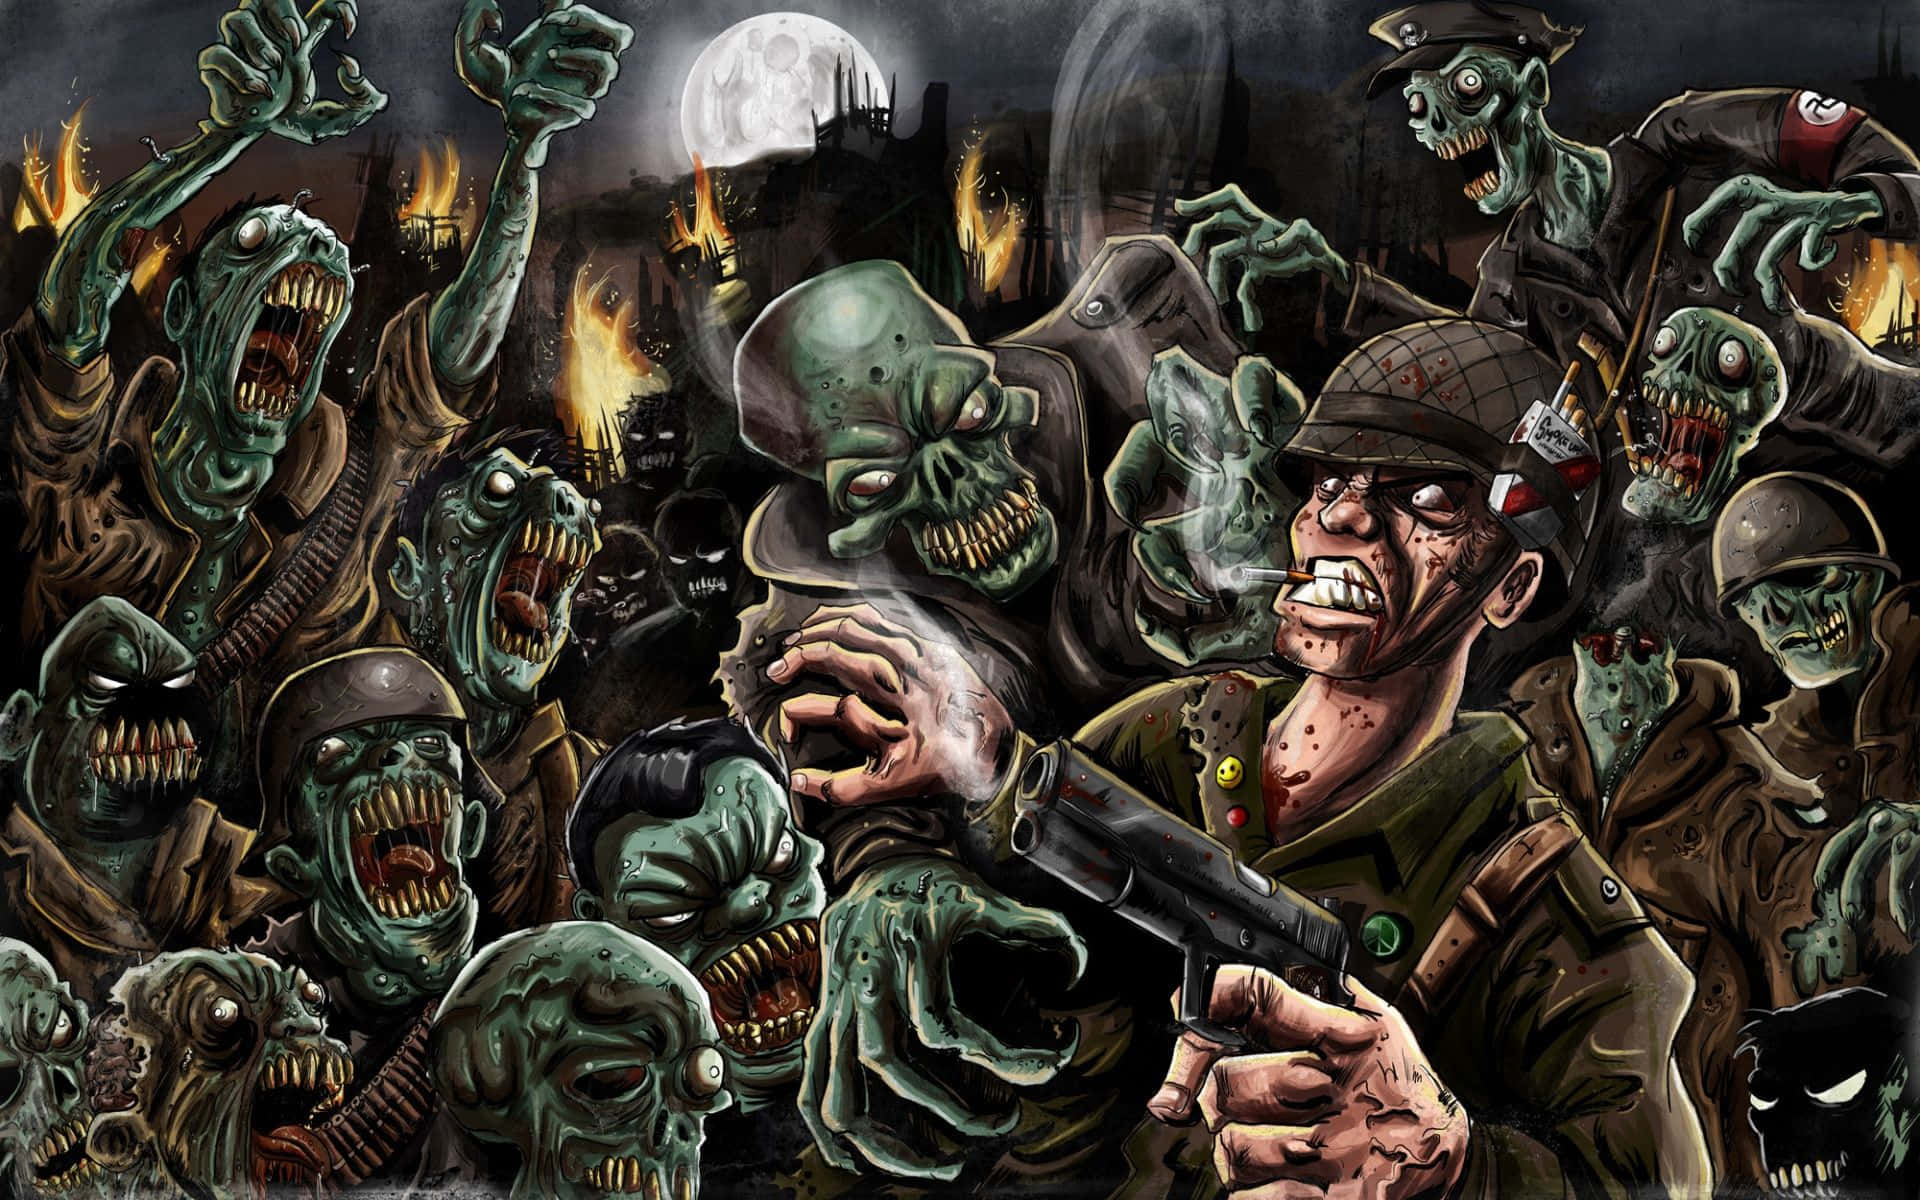 Scary Monster Zombie Soldiers Pictures